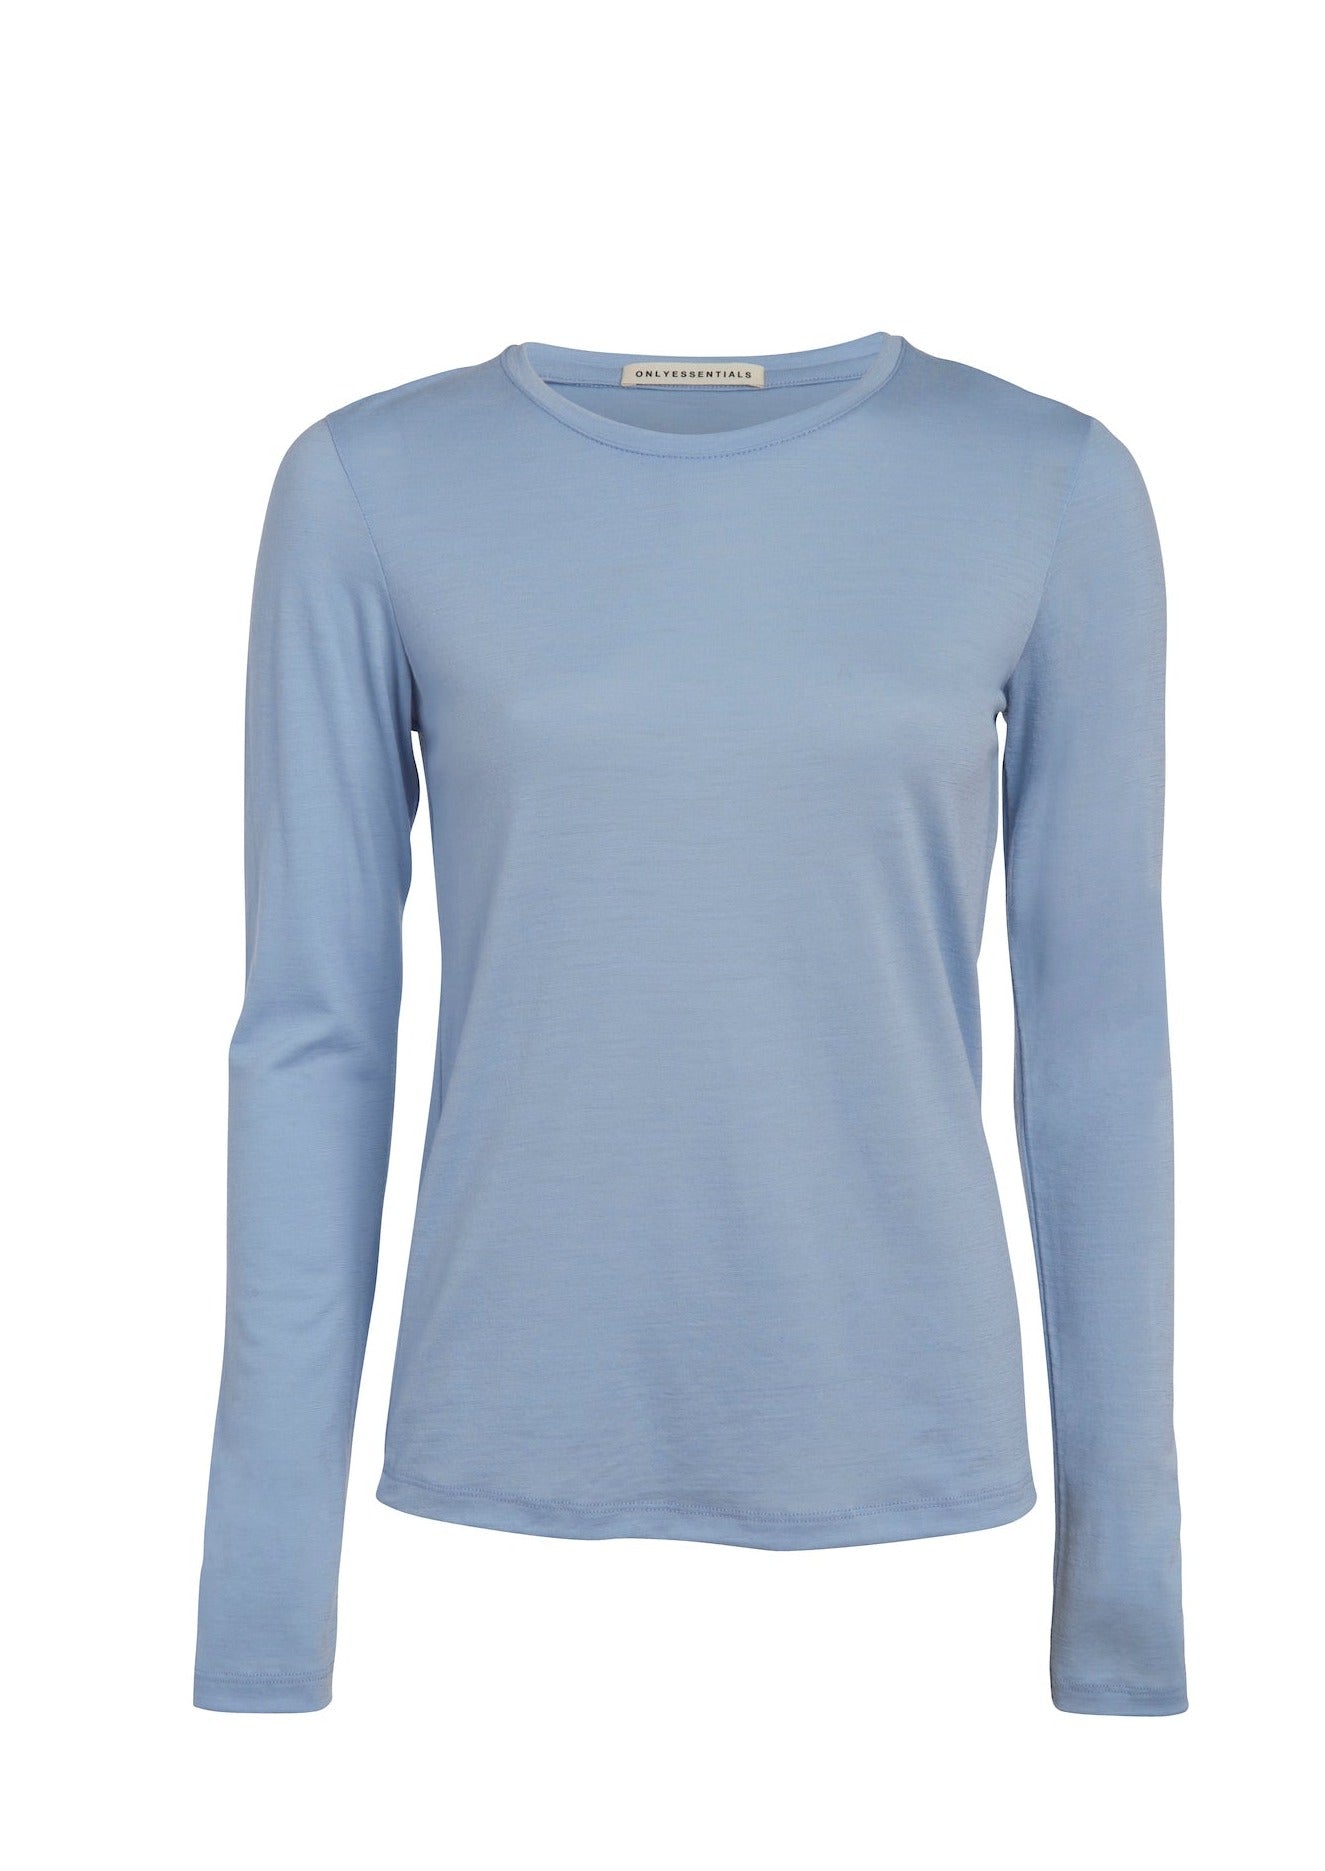 Classic long-sleeve crew neck is soft and lightweight designed for versatility and comfort in your everyday life.